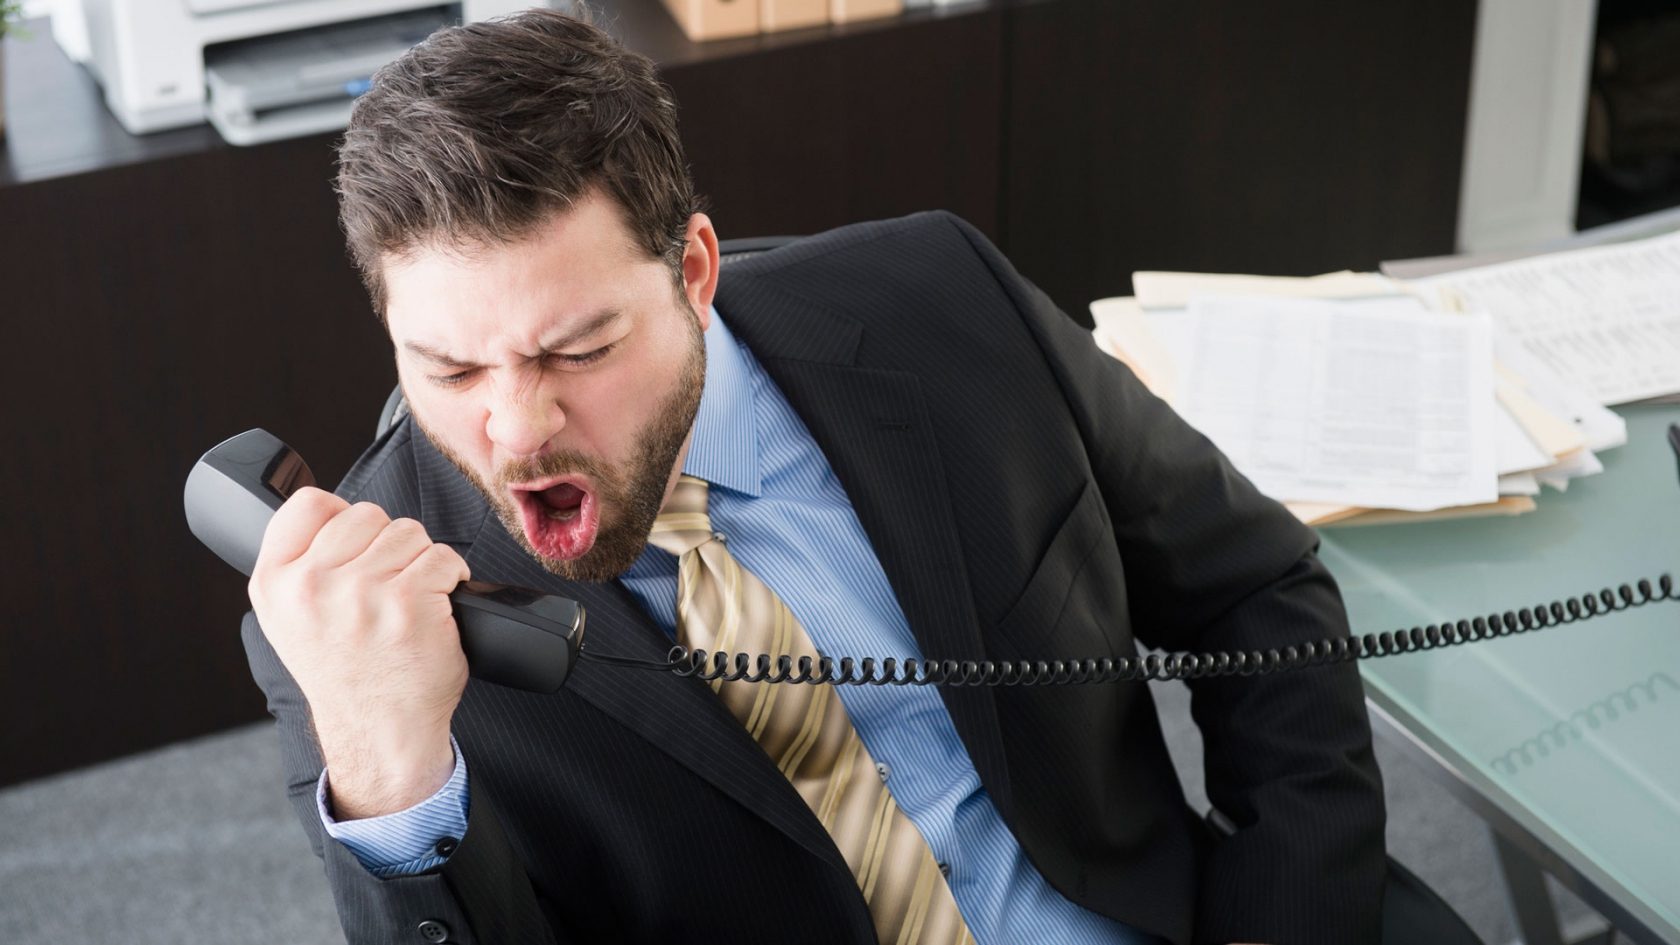 Workplace aggression is on the rise - here&#039;s what you can do about it